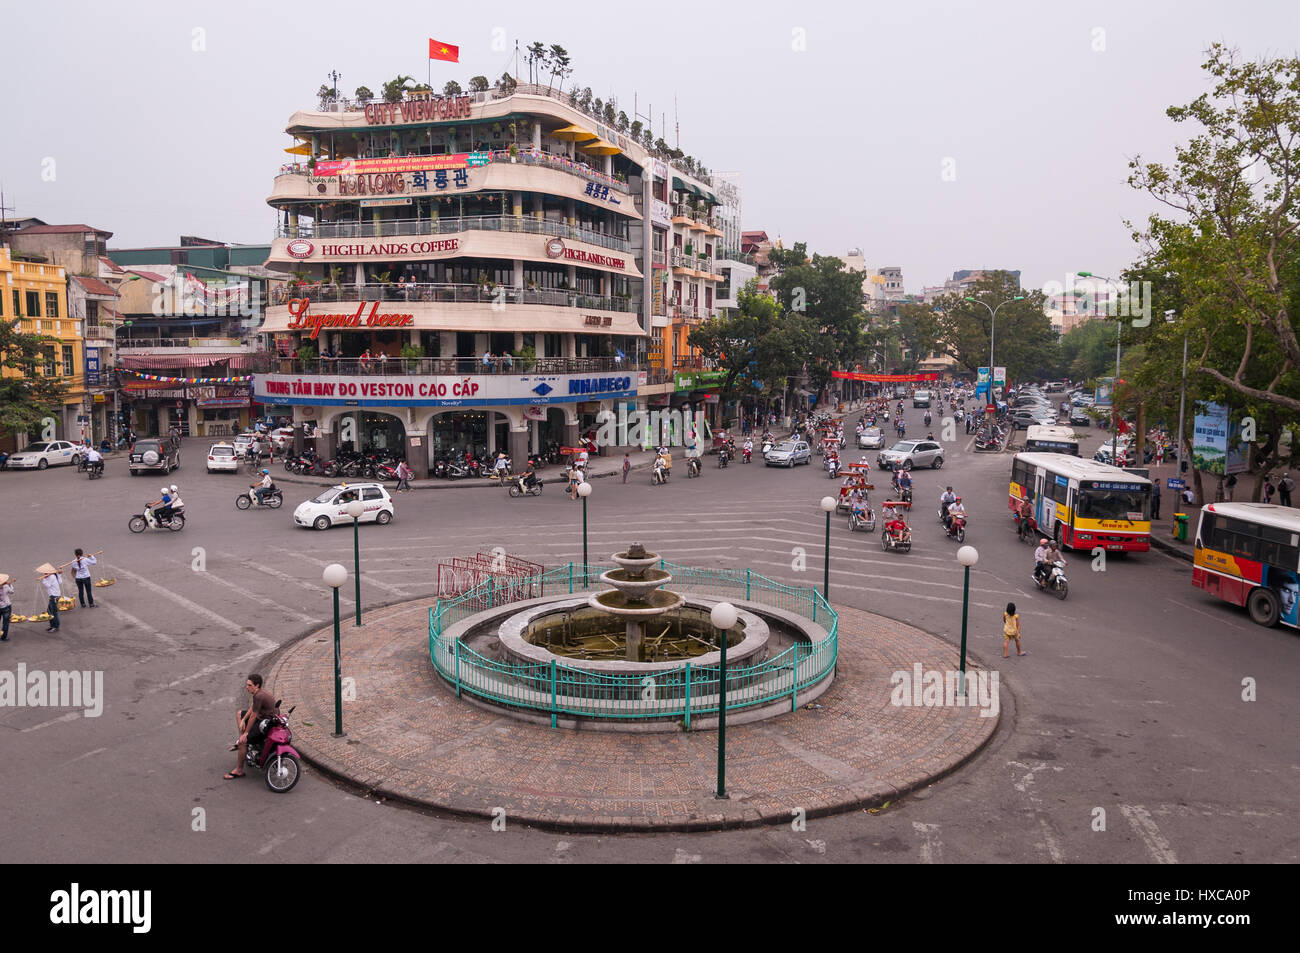 The Highlands Coffee building at Dong Kinh Nghia Thuc Square roundabout junction in Hanoi city, Vietnam Stock Photo